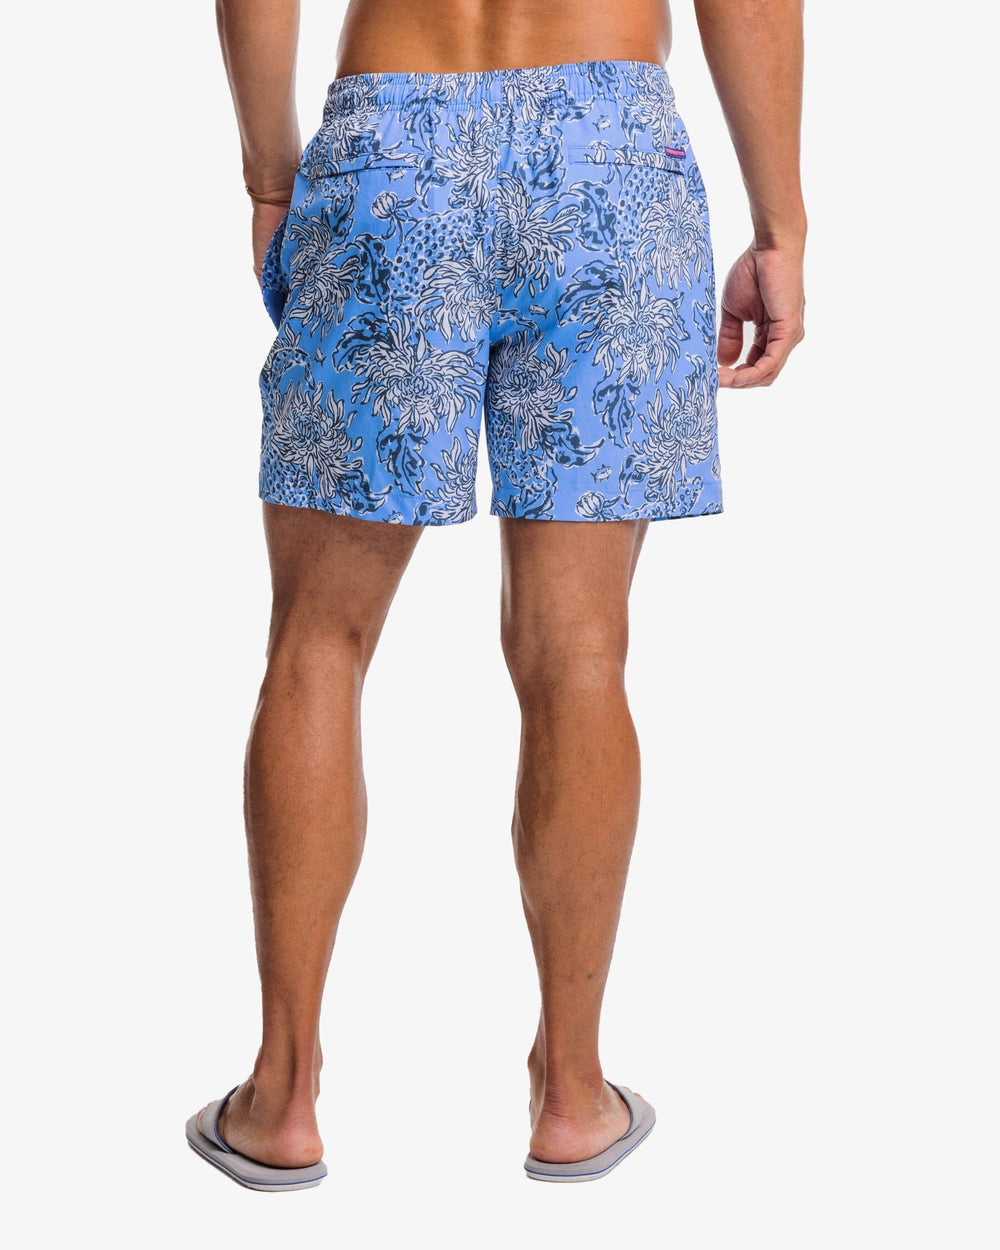 The back view of the Croc and Lock It Swim Trunk by Southern Tide - Boca Blue